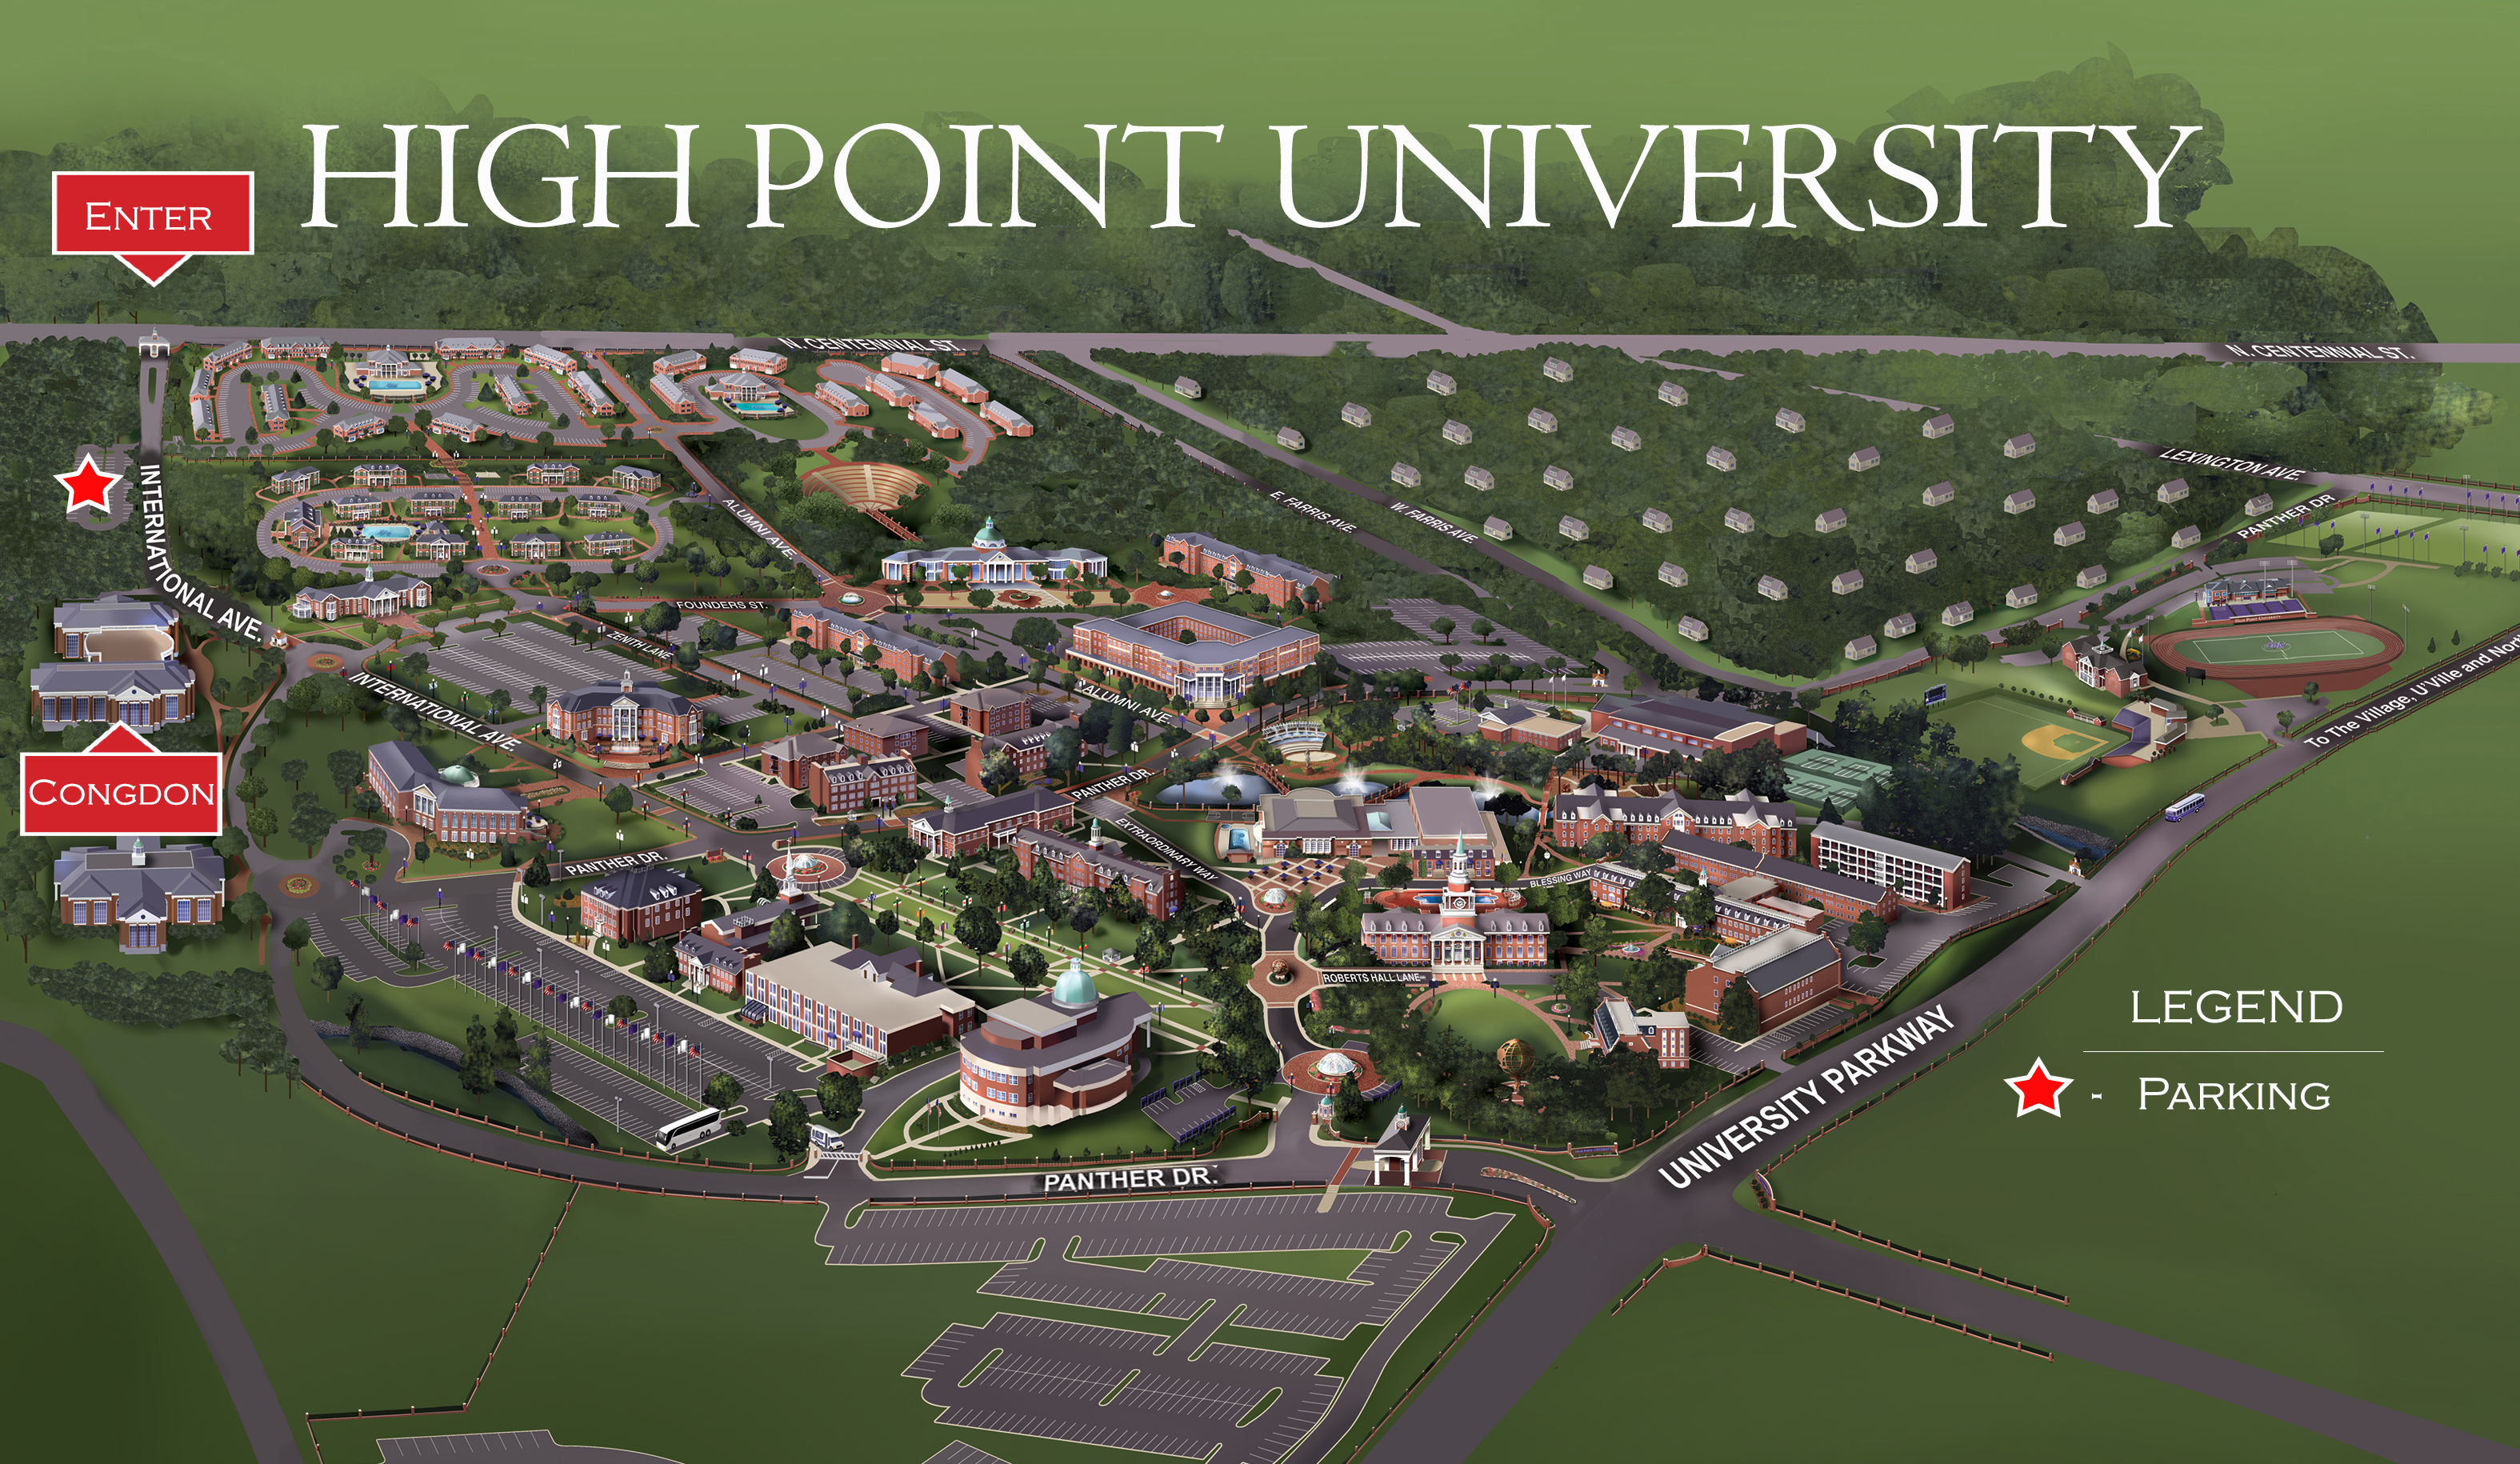 high point university campus map High Point University Campus Map Piedmont Triad Partnership high point university campus map